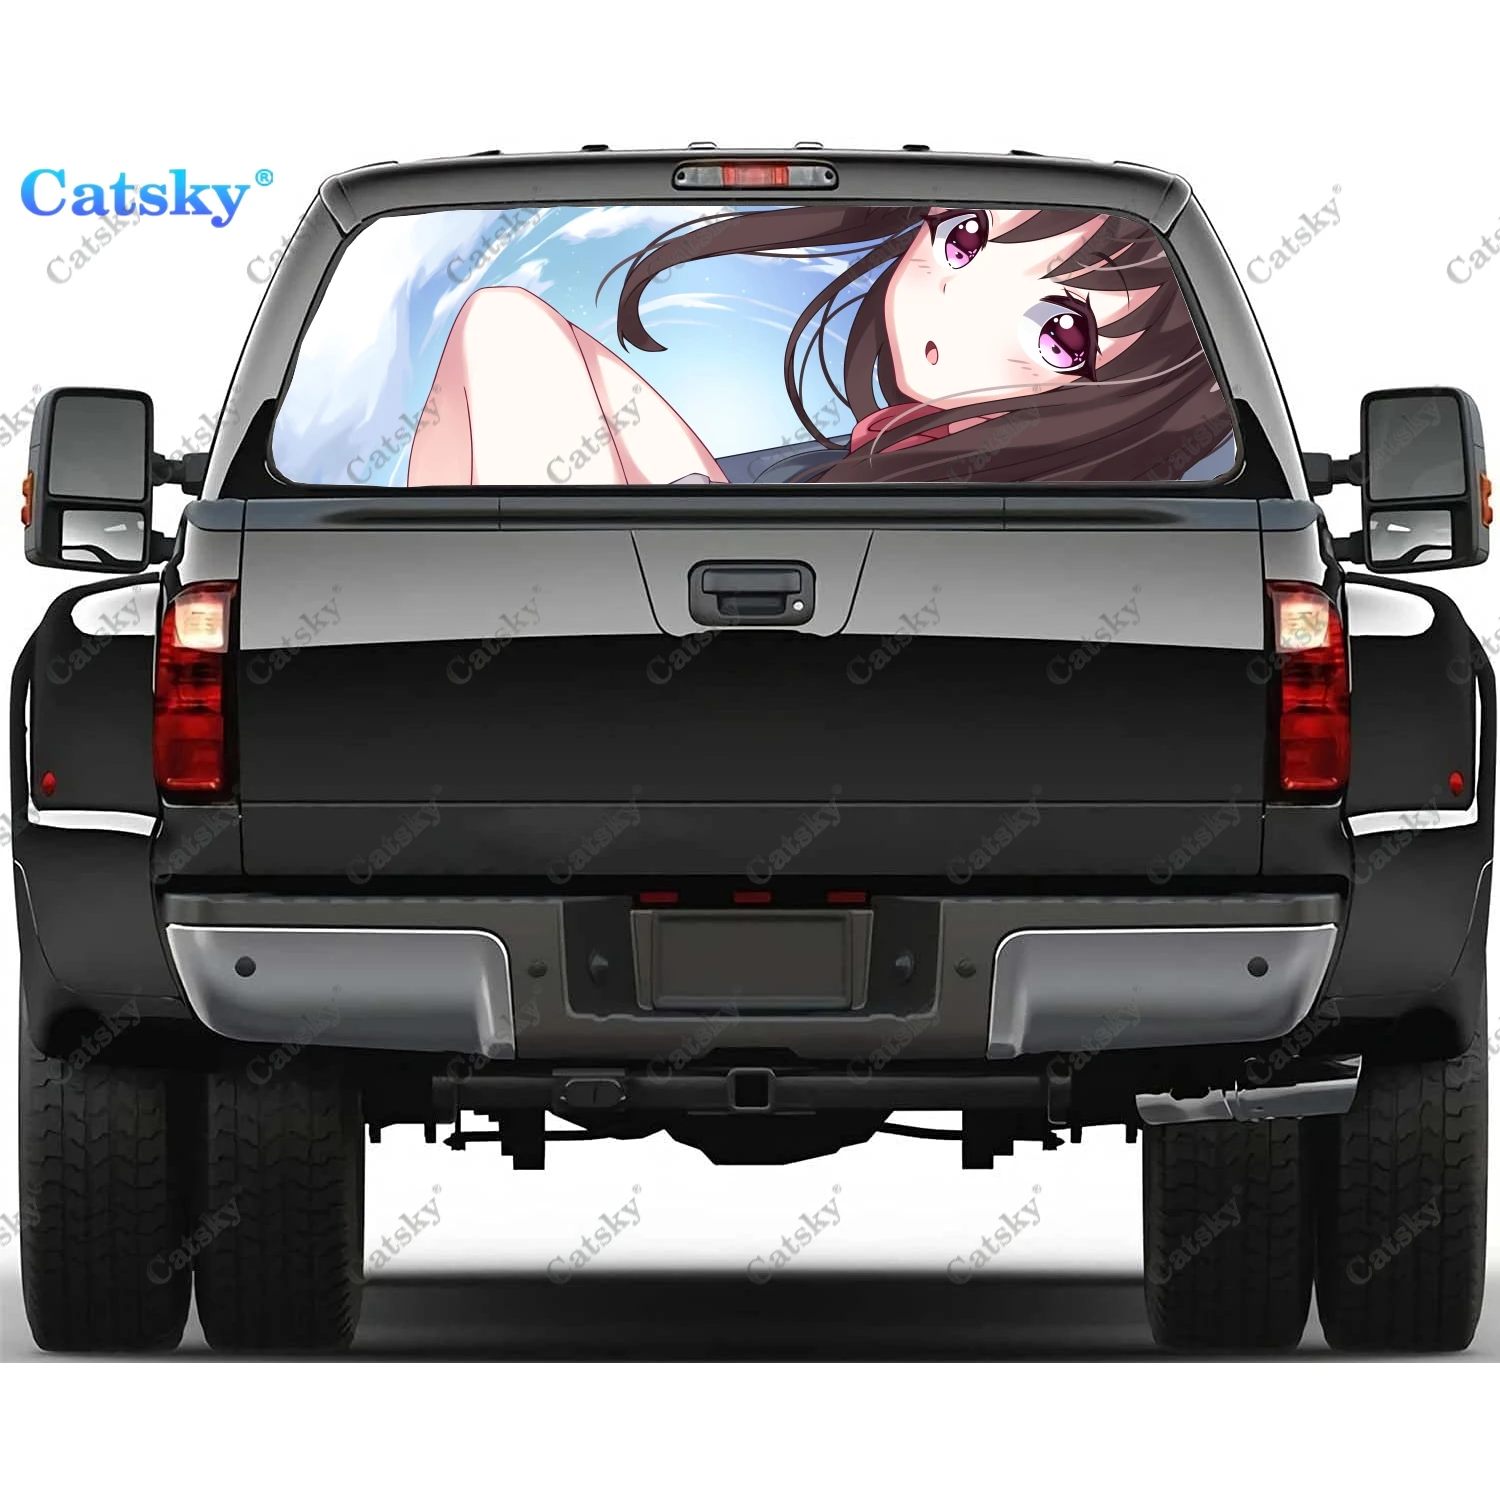 

Noragami Anime Printing Rear Window Stickers Windshield Decal Truck Rear Window Decal Universal Tint Perforated Vinyl Graphic